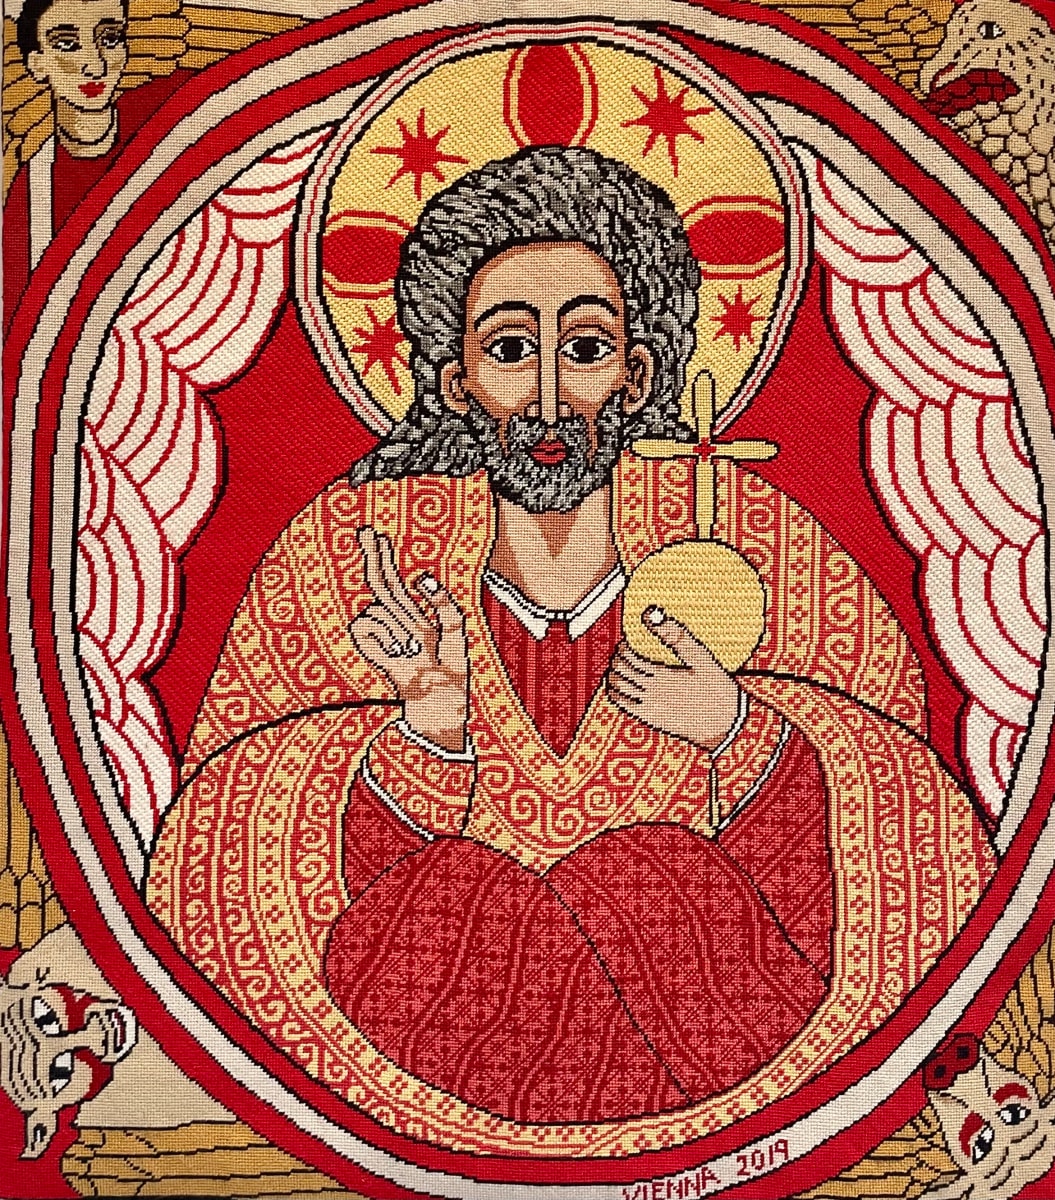 Christian Banner of the Universal Christ by Vienna Cobb-Anderson 